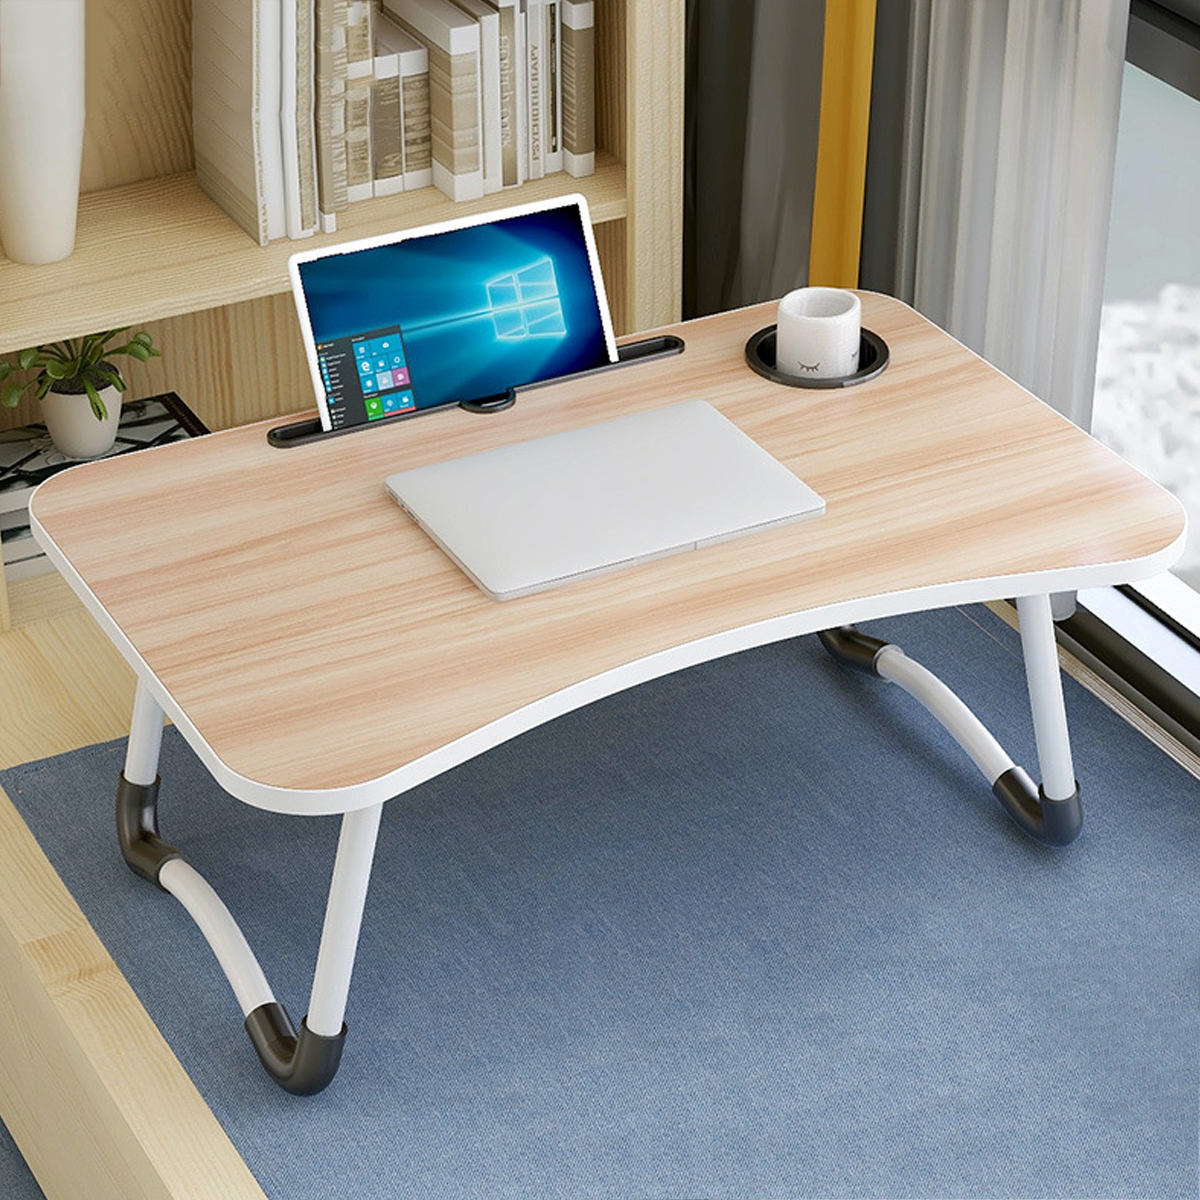 Folding-Laptop-Table-with-Slot-Hole-Notebook-Table-College-Student-Dormitory-for-Bedside-Sofa-Study--1757596-7